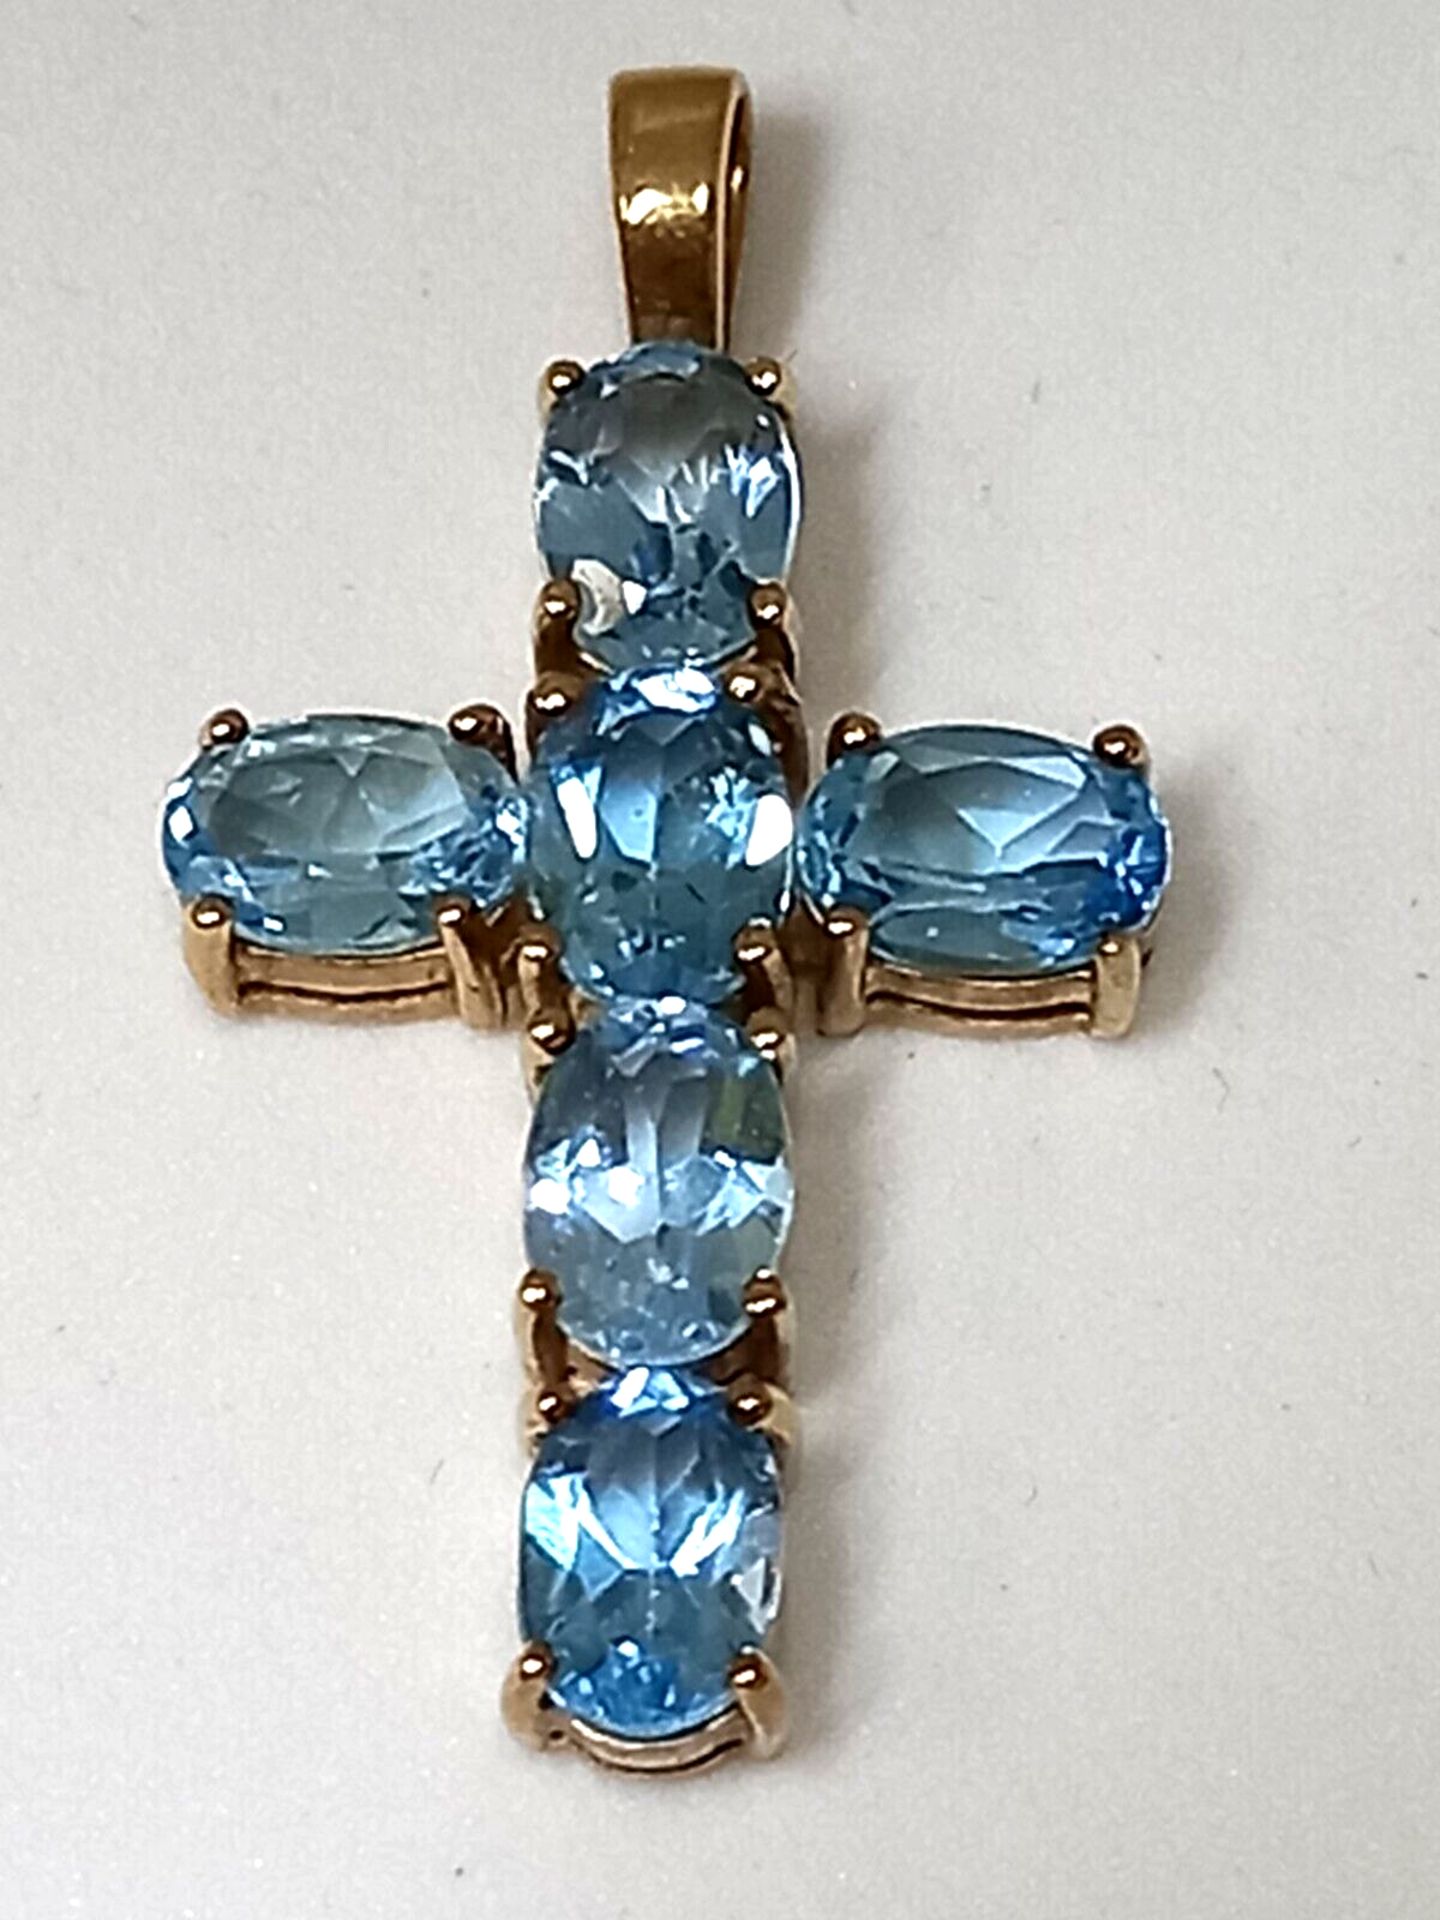 BLUE OVAL TOPAZ CROSS 9CT YELLOW GOLD IN GIFT BOX WITH VALUATION CERTIFICATE OF £895 - Image 2 of 6